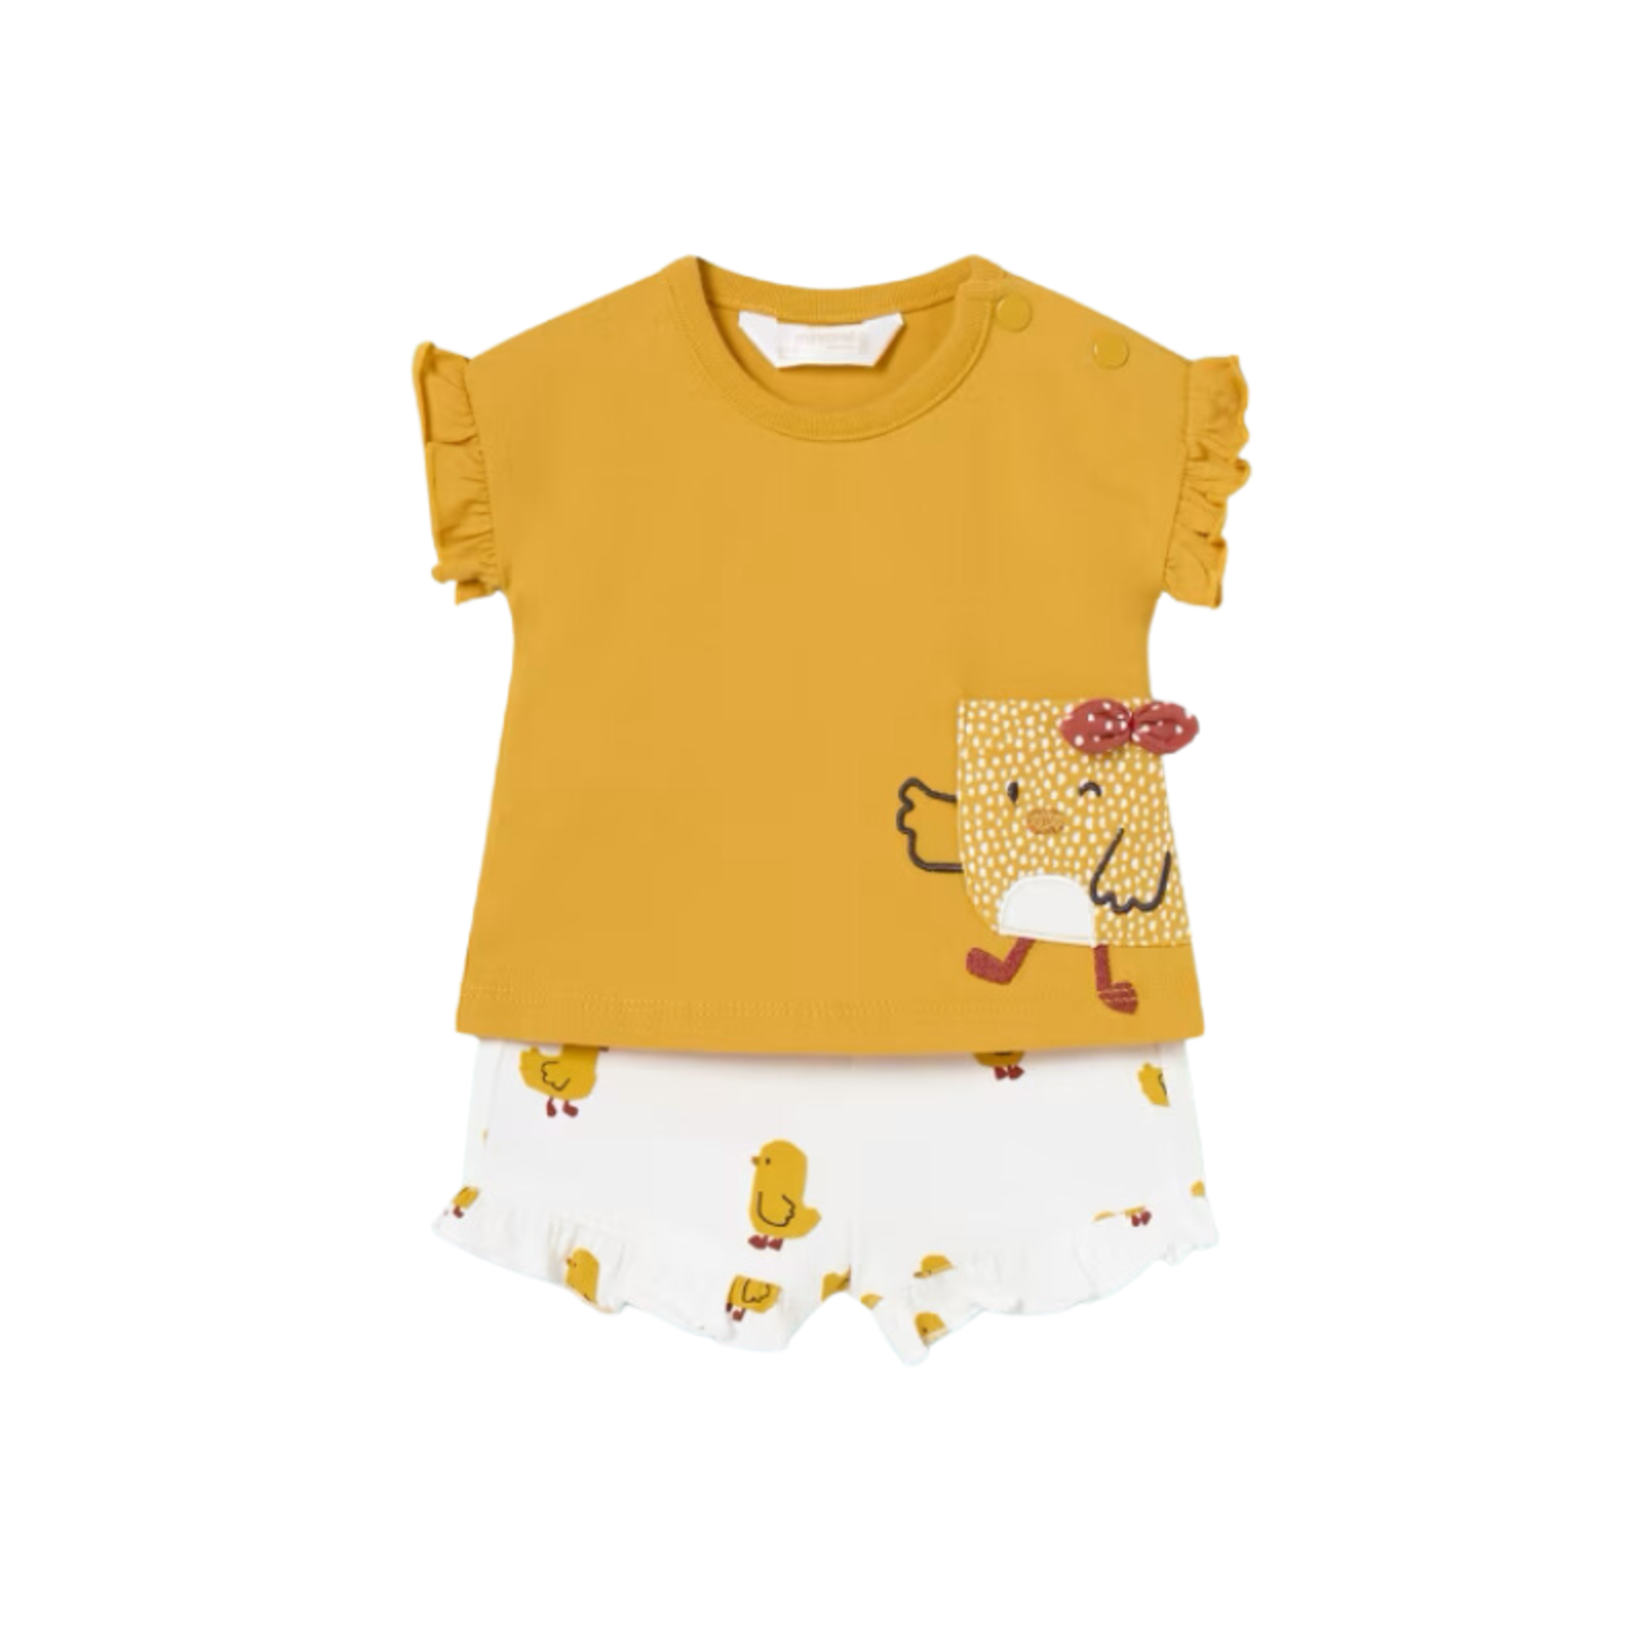 Mayoral Mayoral 2pc Ducky Shirt w/ AOP Ducky Shorts Corn